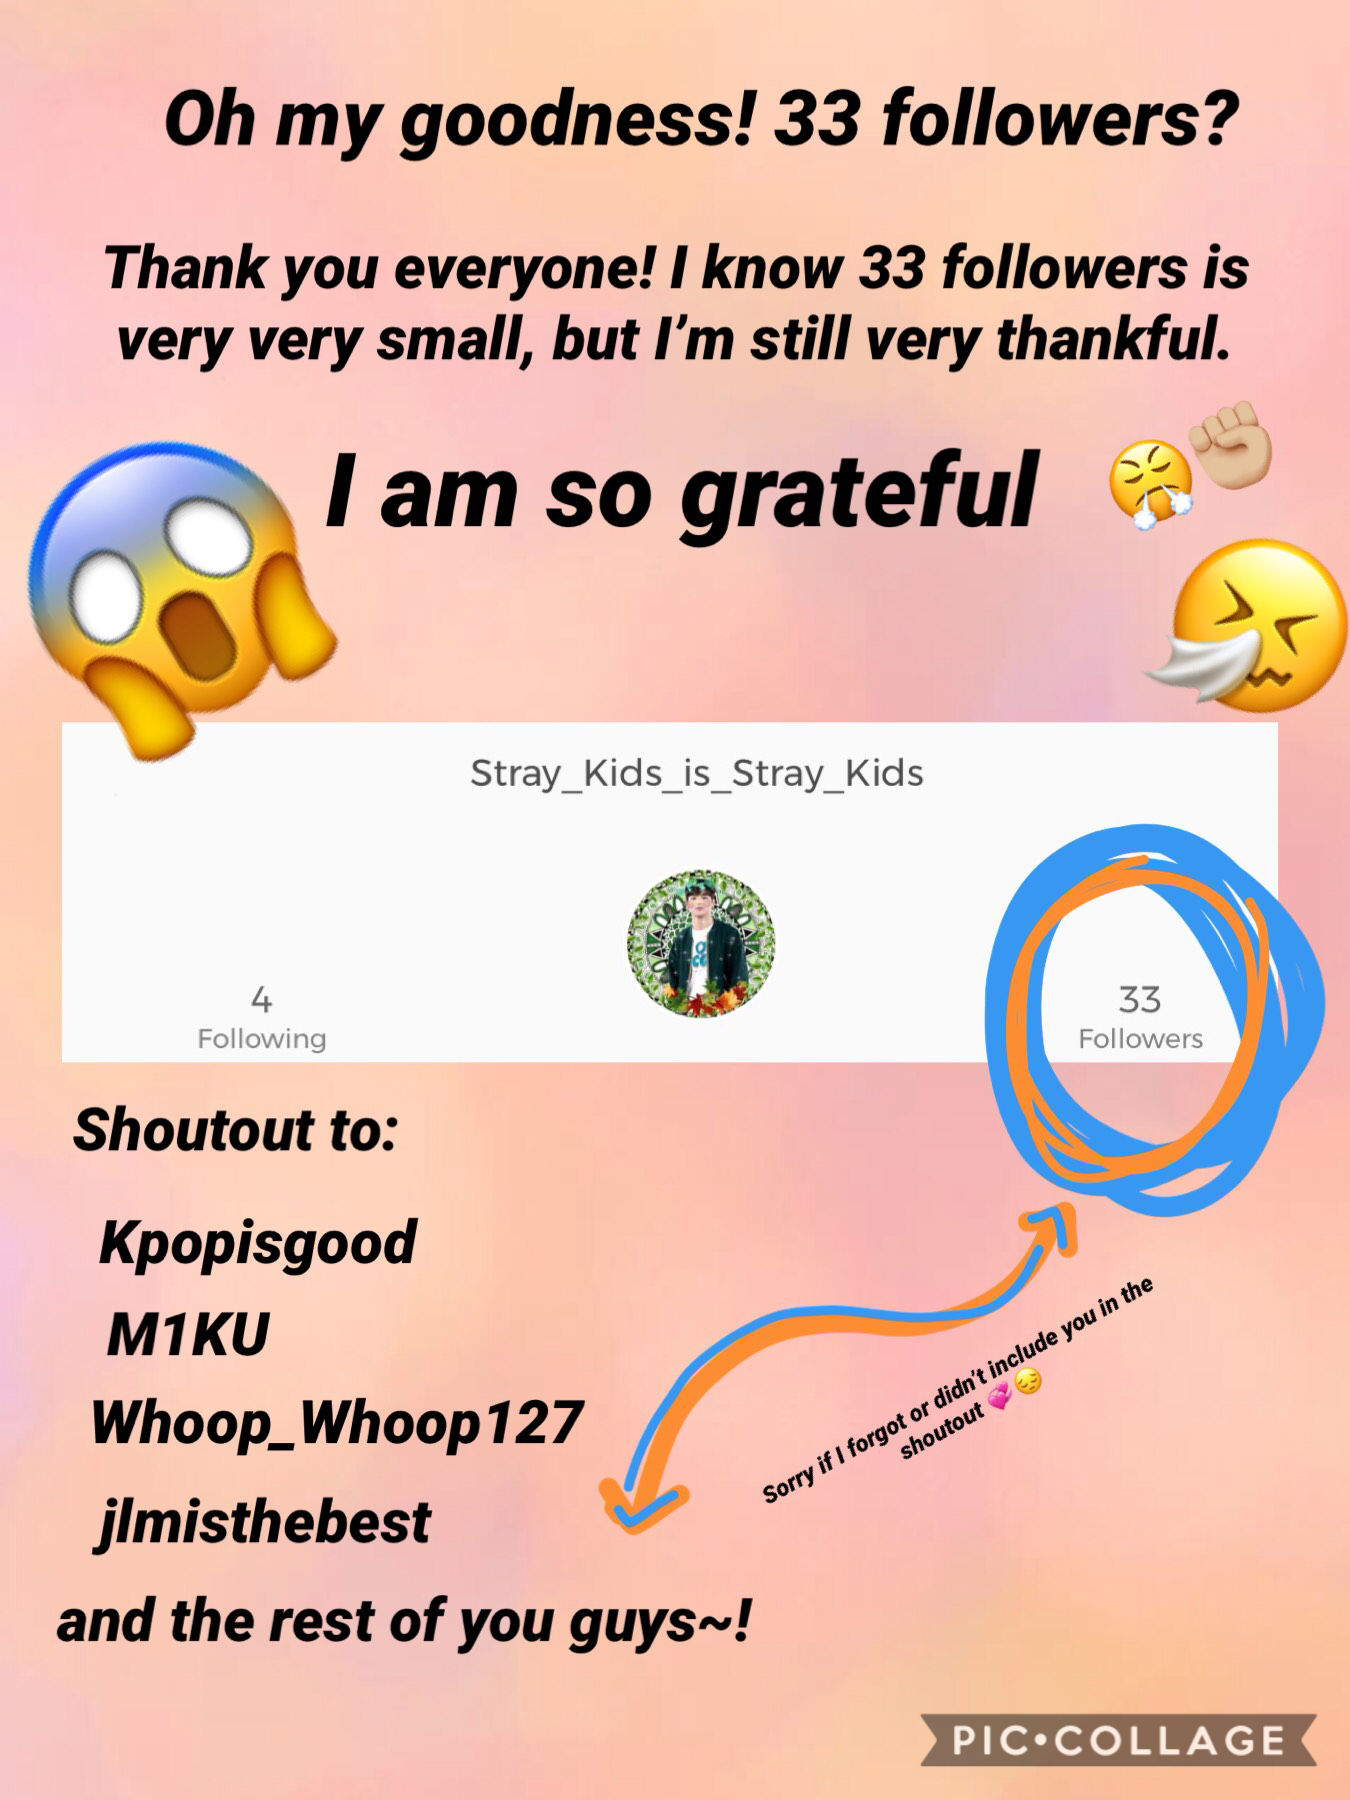 - 🤗 -

Thanks y’all~

Again, I’m sorry if I didn’t include some of the ones I missed in the shoutout 😬😓

33 is such a random # 😂 